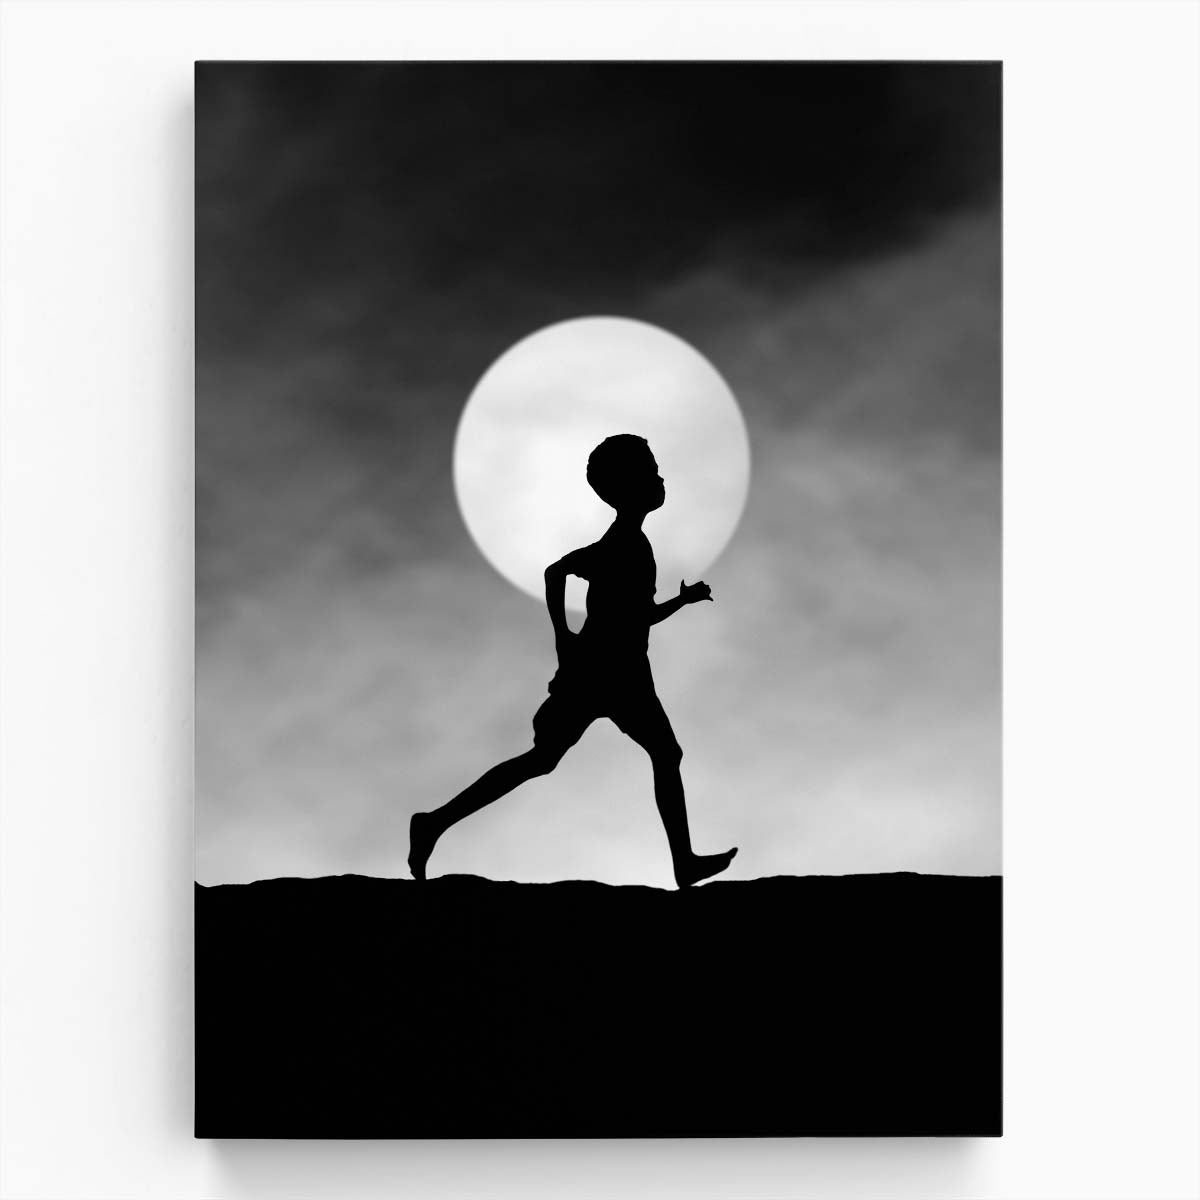 Surreal Monochrome Dream Catcher - Boy Silhouette Photography Art by Luxuriance Designs, made in USA